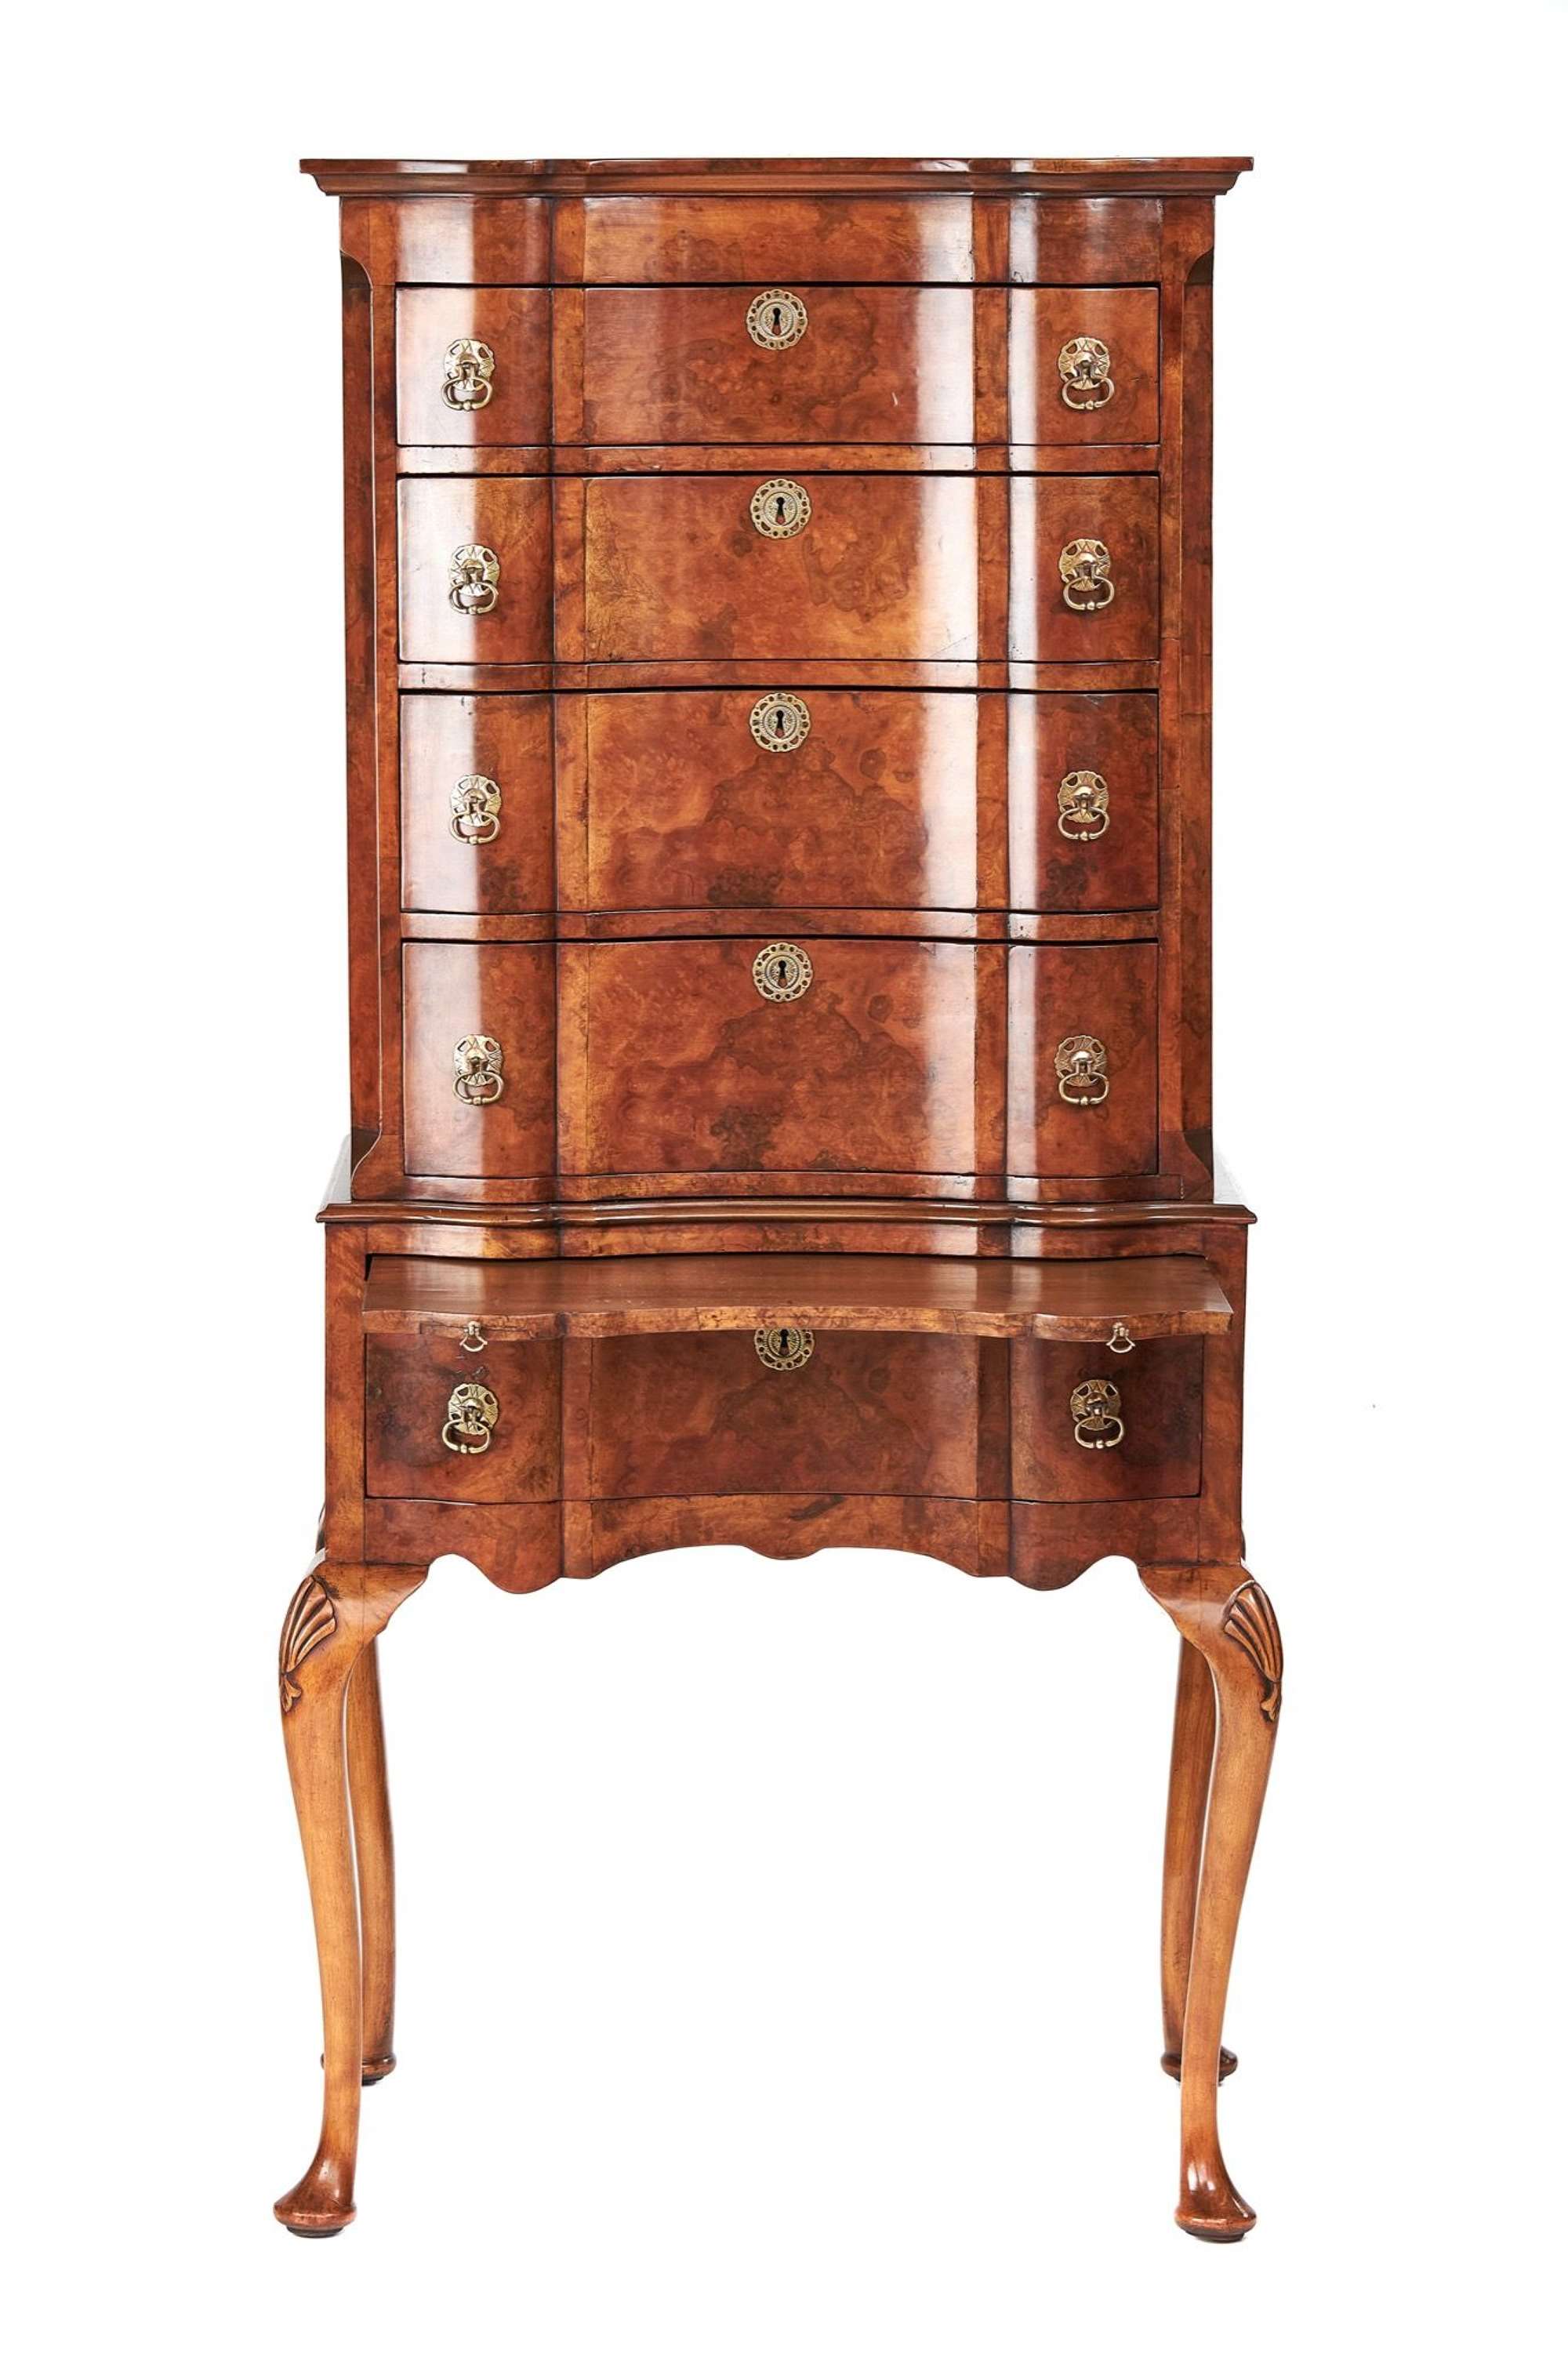 Queen Anne Revival Burr Walnut Chest On Stand